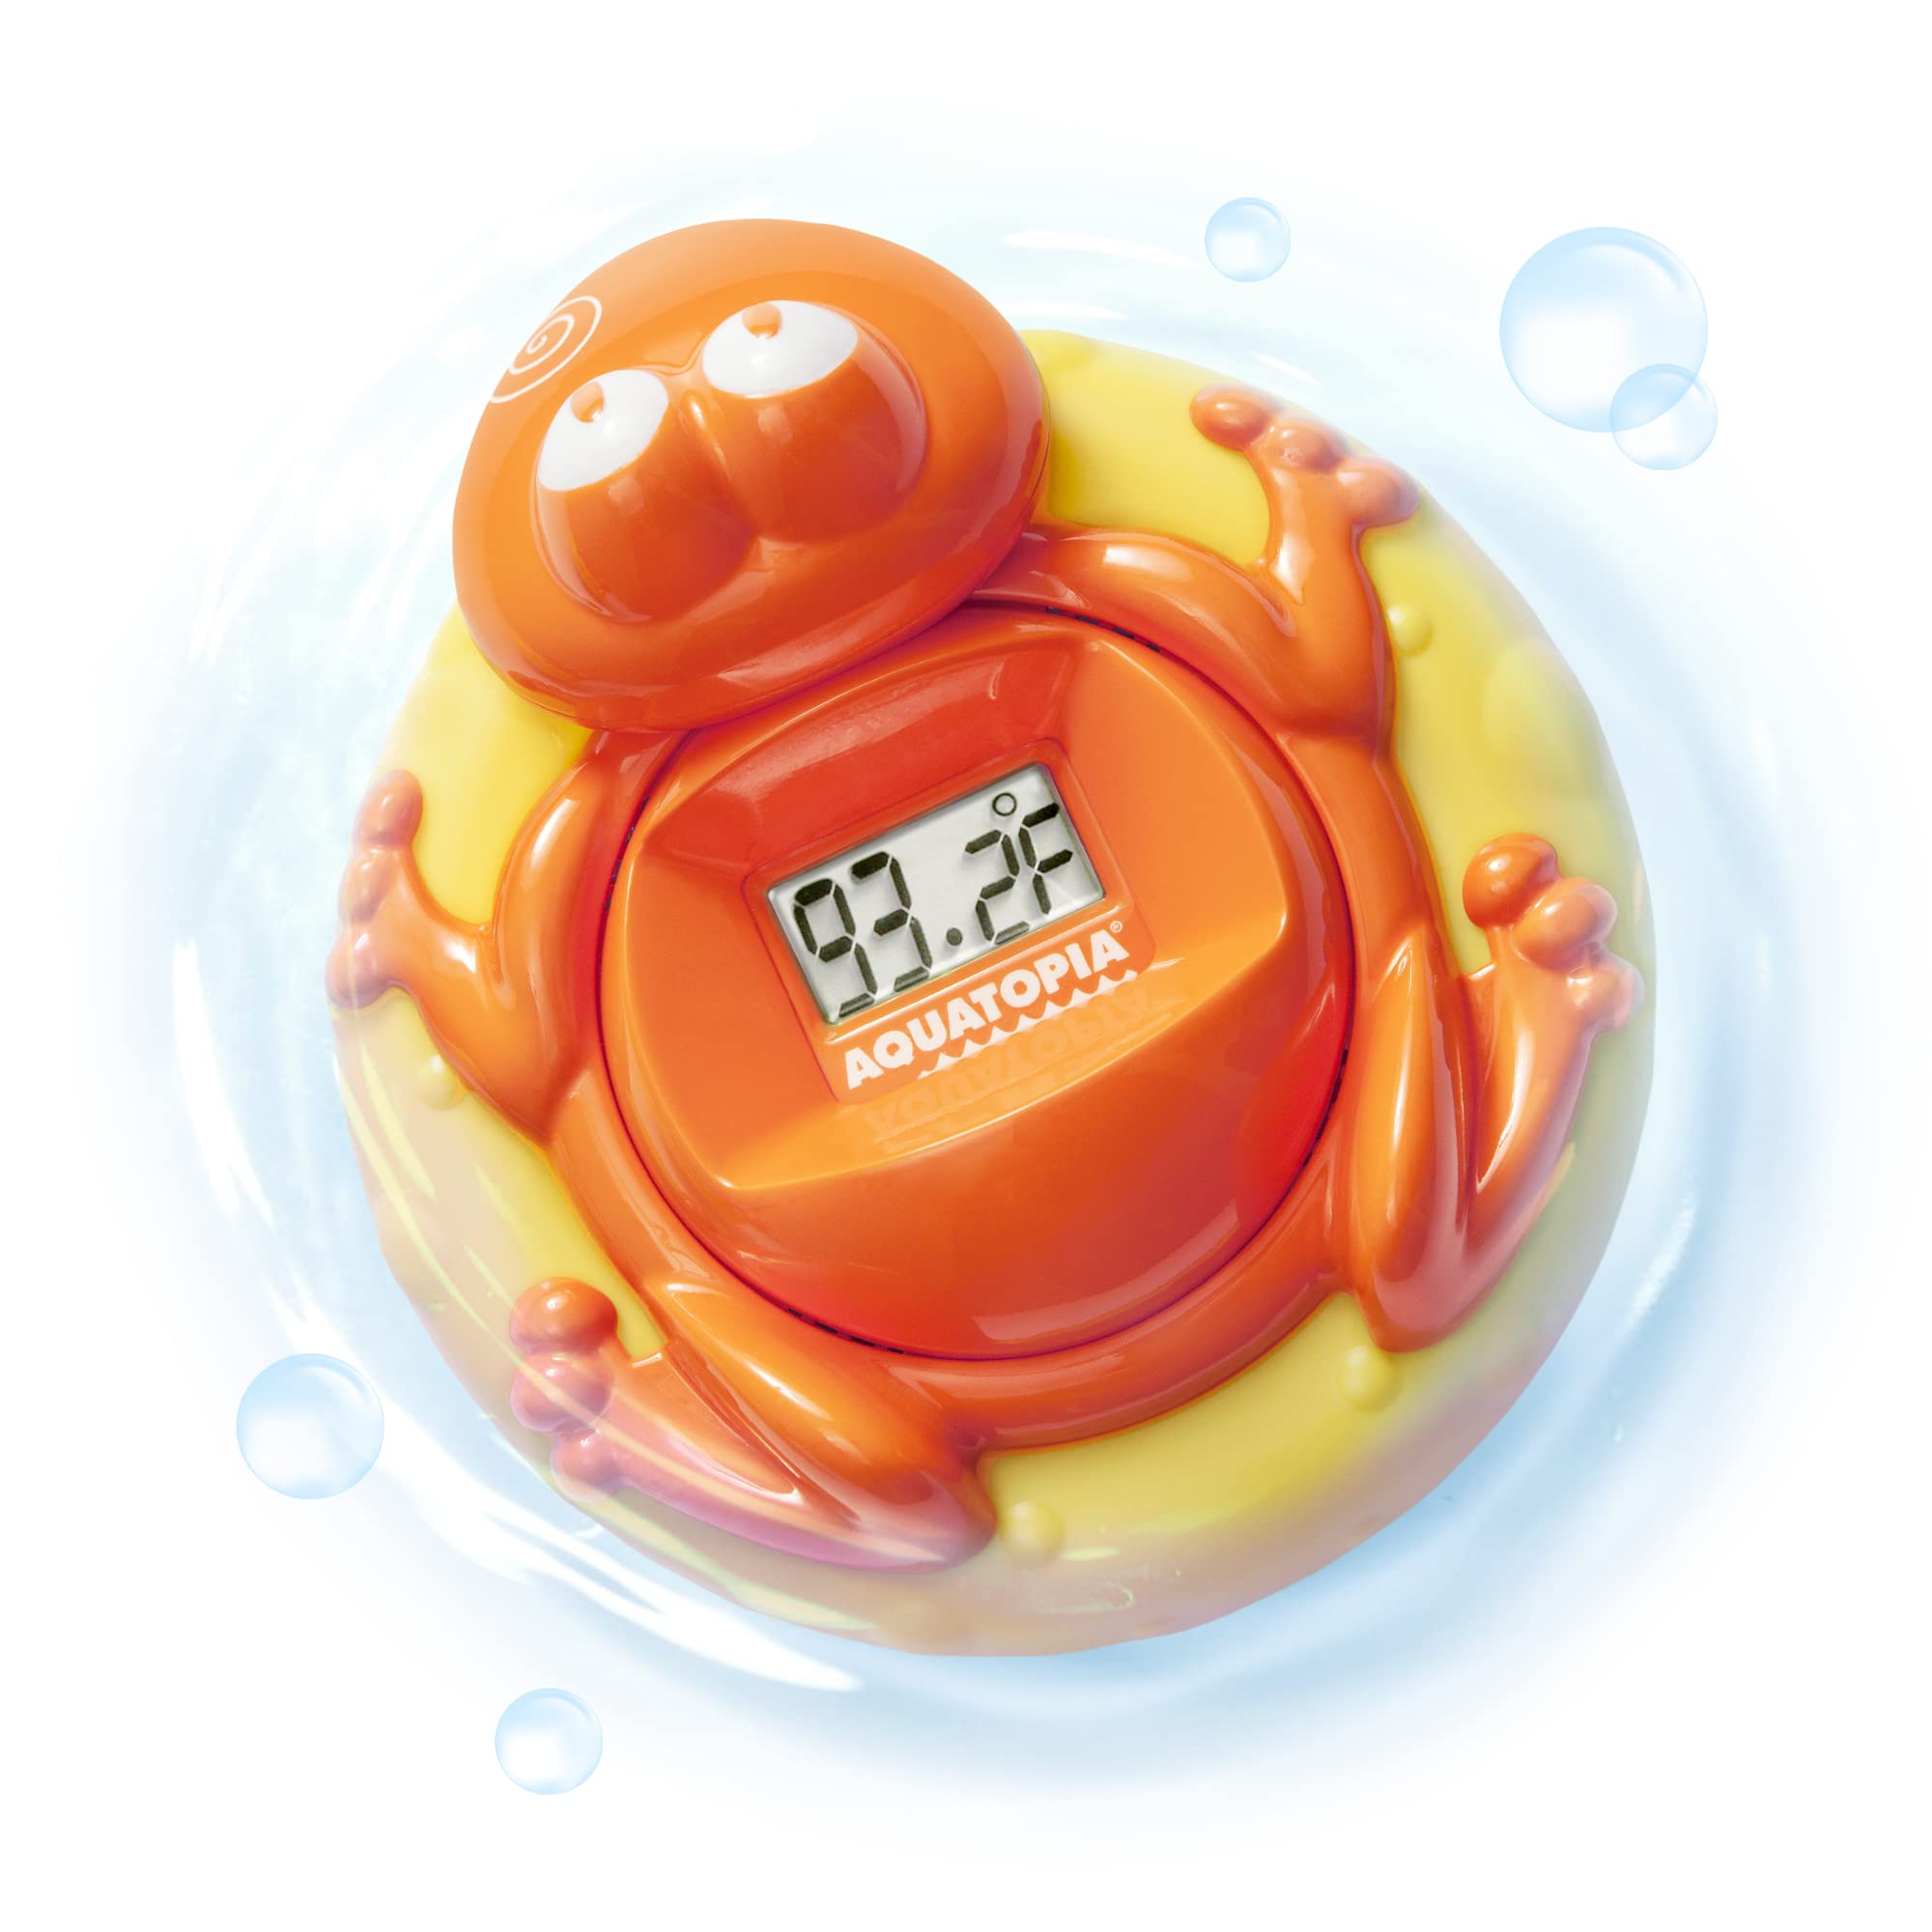 Aquatopia Baby Bath Thermometer Floating Toy with Digital Audible Alarm, Baby Water Thermometer for Bath Temp, Cute Baby Bath Es